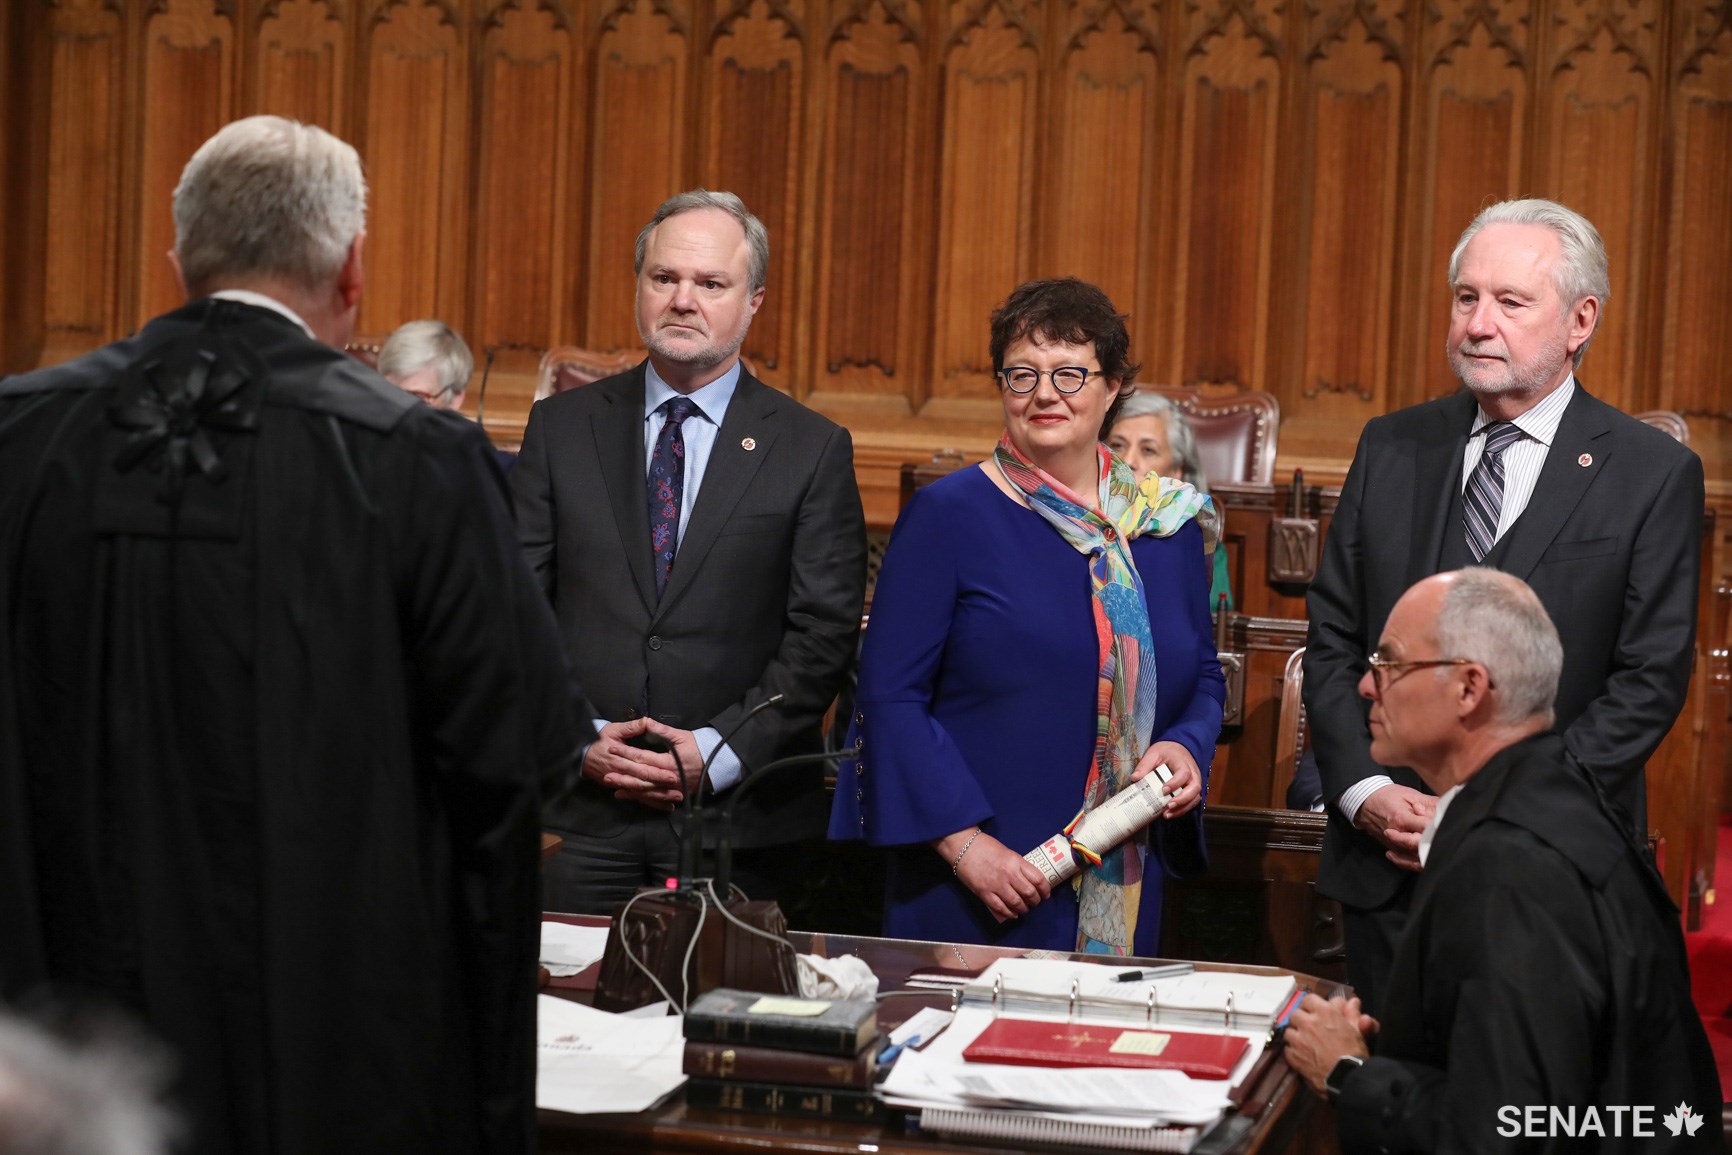 Senator Paula Simons, centre, is joined by Senators André Pratte and Peter Harder during a swearing-in ceremony on October 16, 2018.